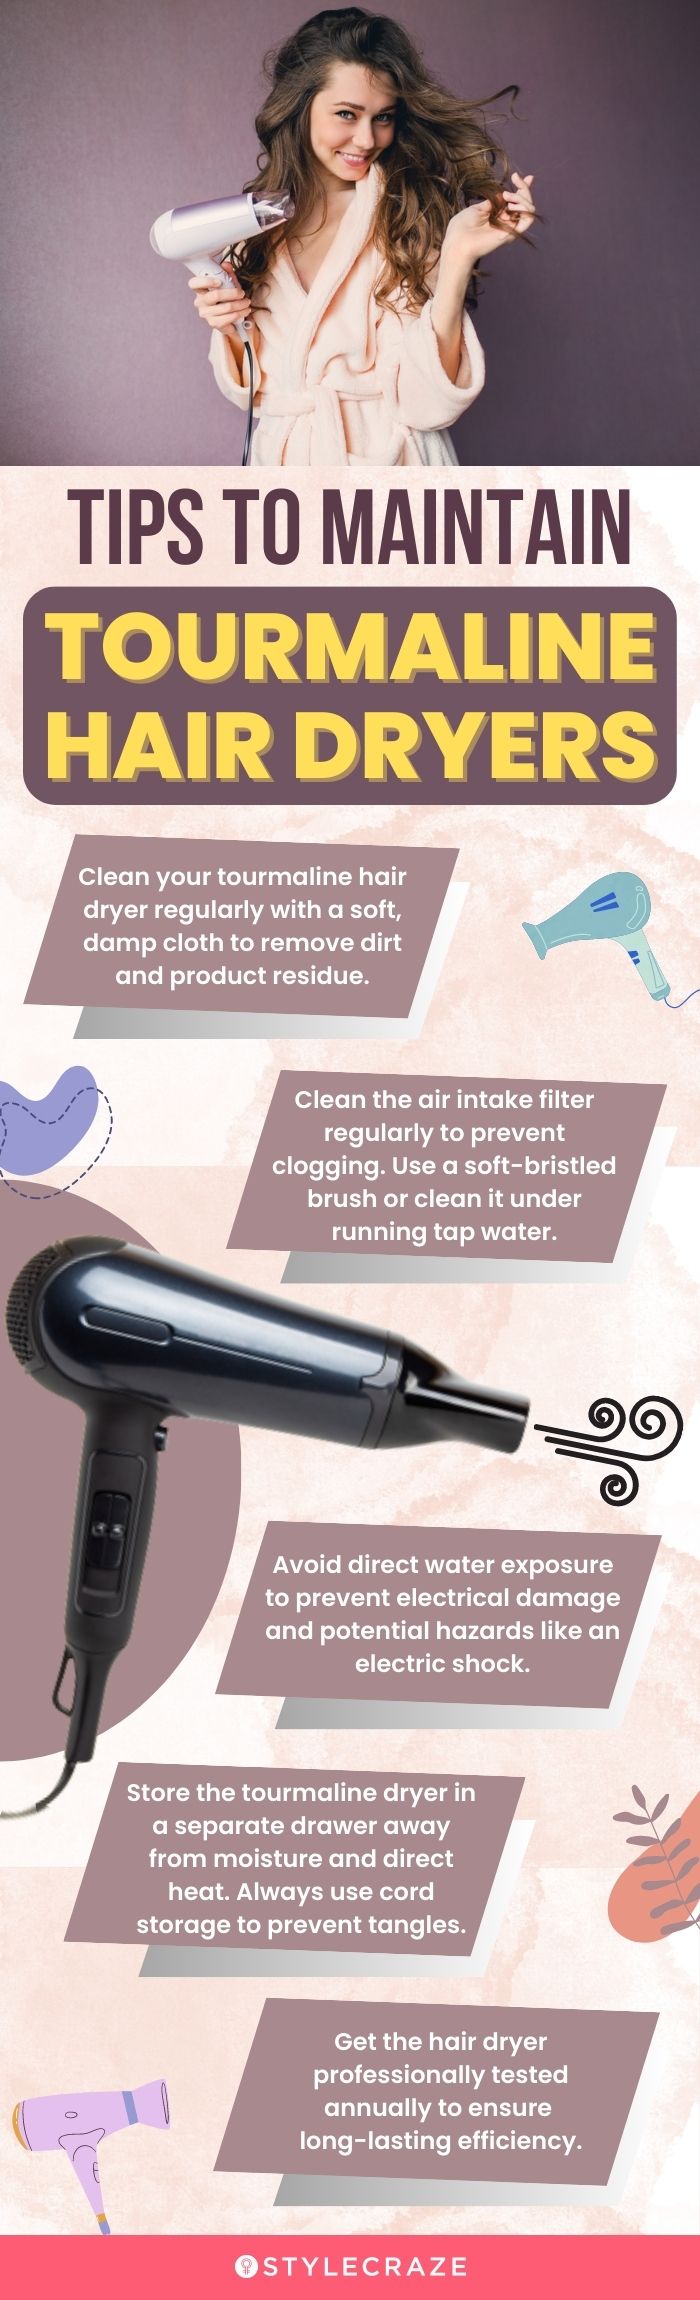 Tips To Maintain Tourmaline Hair Dryer(infographic)